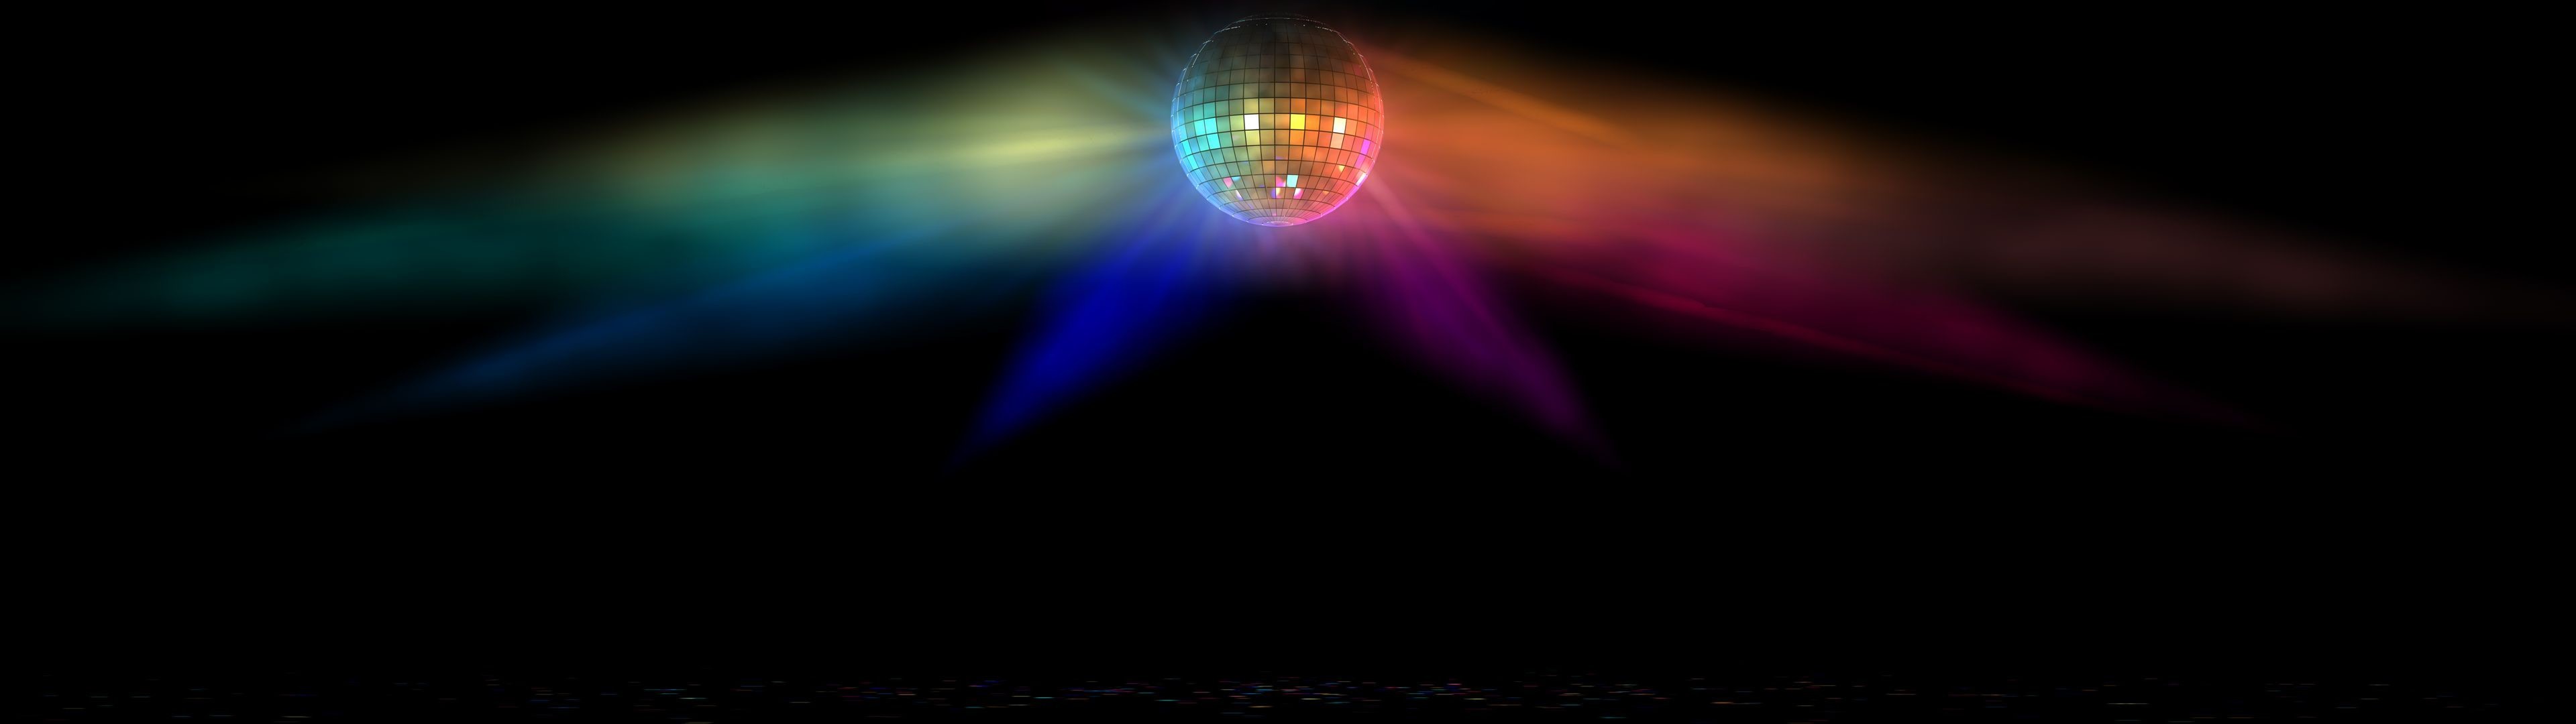 3840x1080 HDQ-Disco Wallpapers 2016 HQ Definition